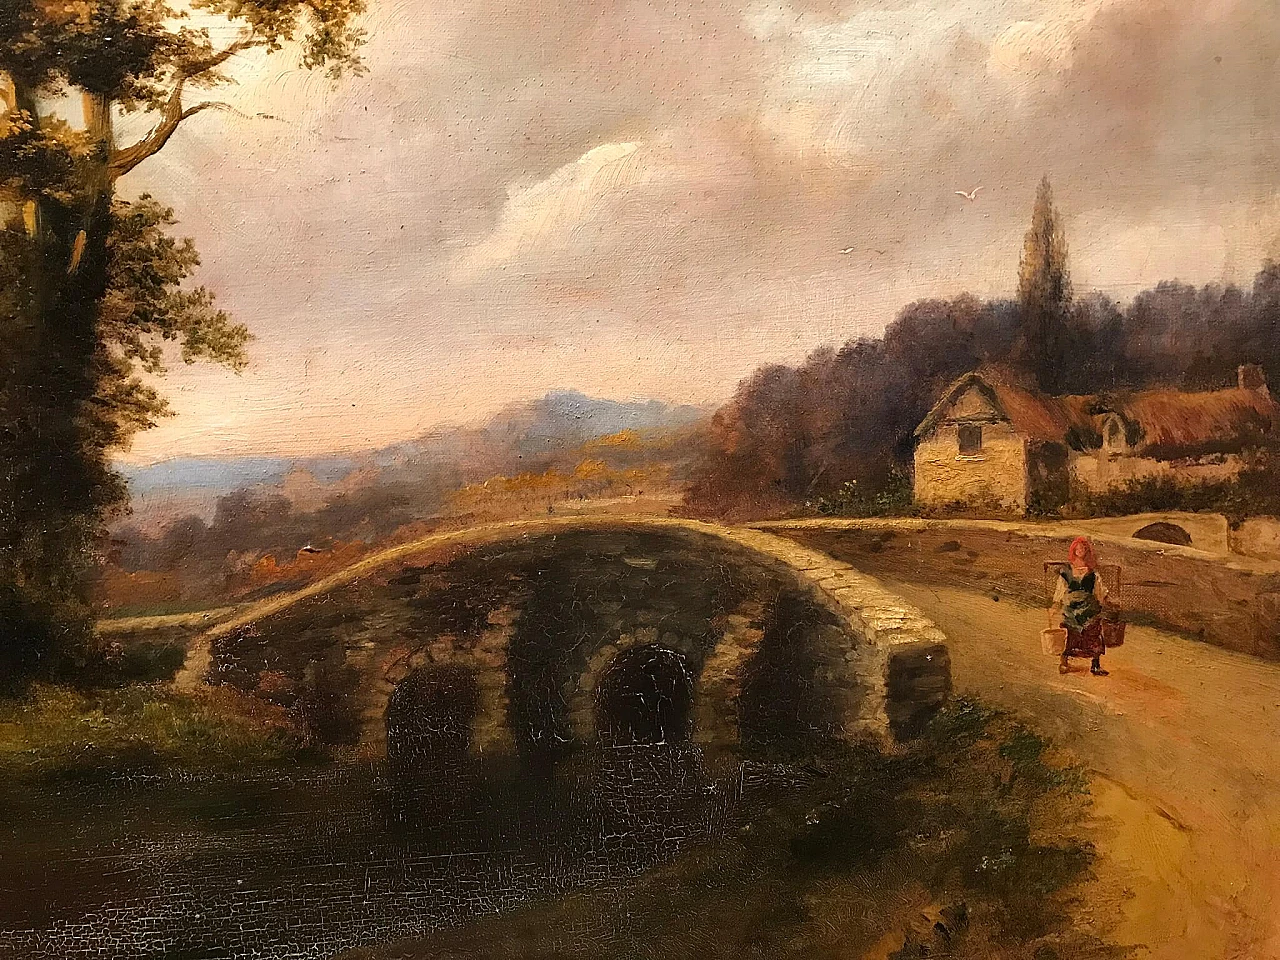 Oil painting on canvas with bucolic landscape, '800 1175906